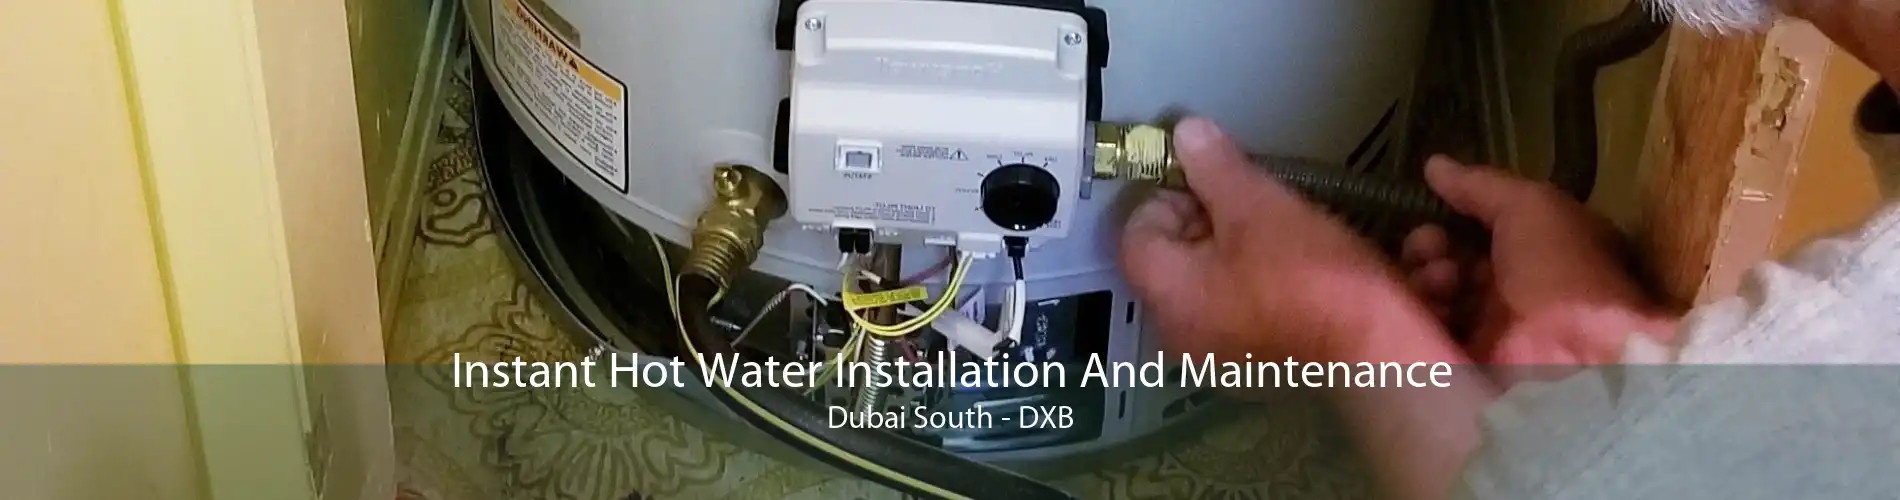 Instant Hot Water Installation And Maintenance Dubai South - DXB